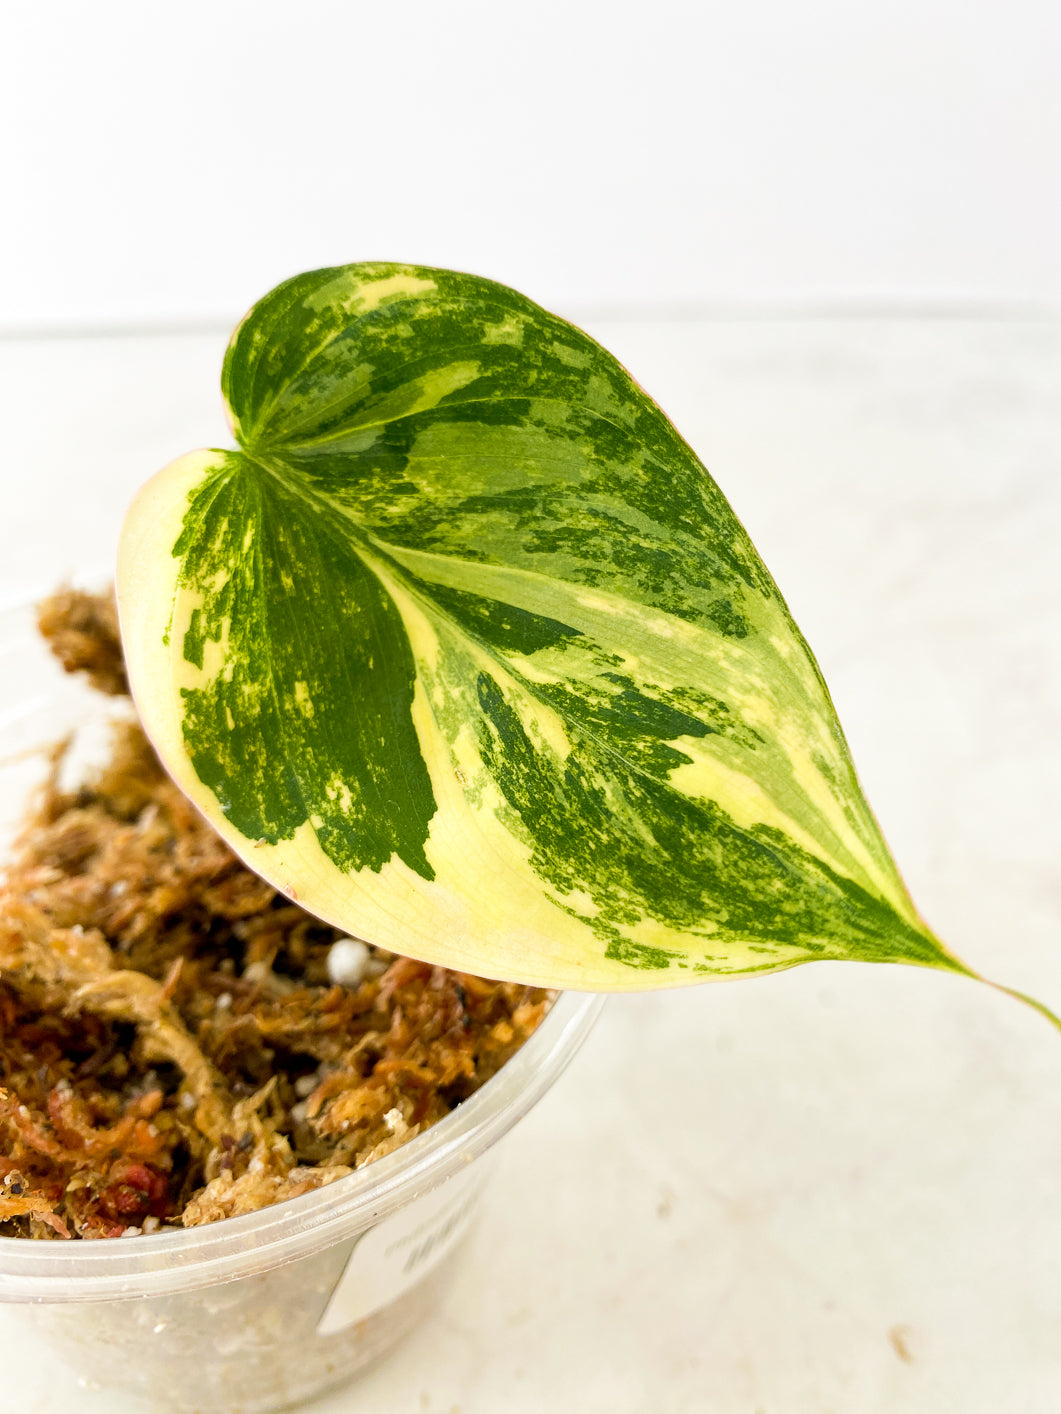 Philondendron Micans Aurea Variegated Rooting 1 leaf 1 sprout